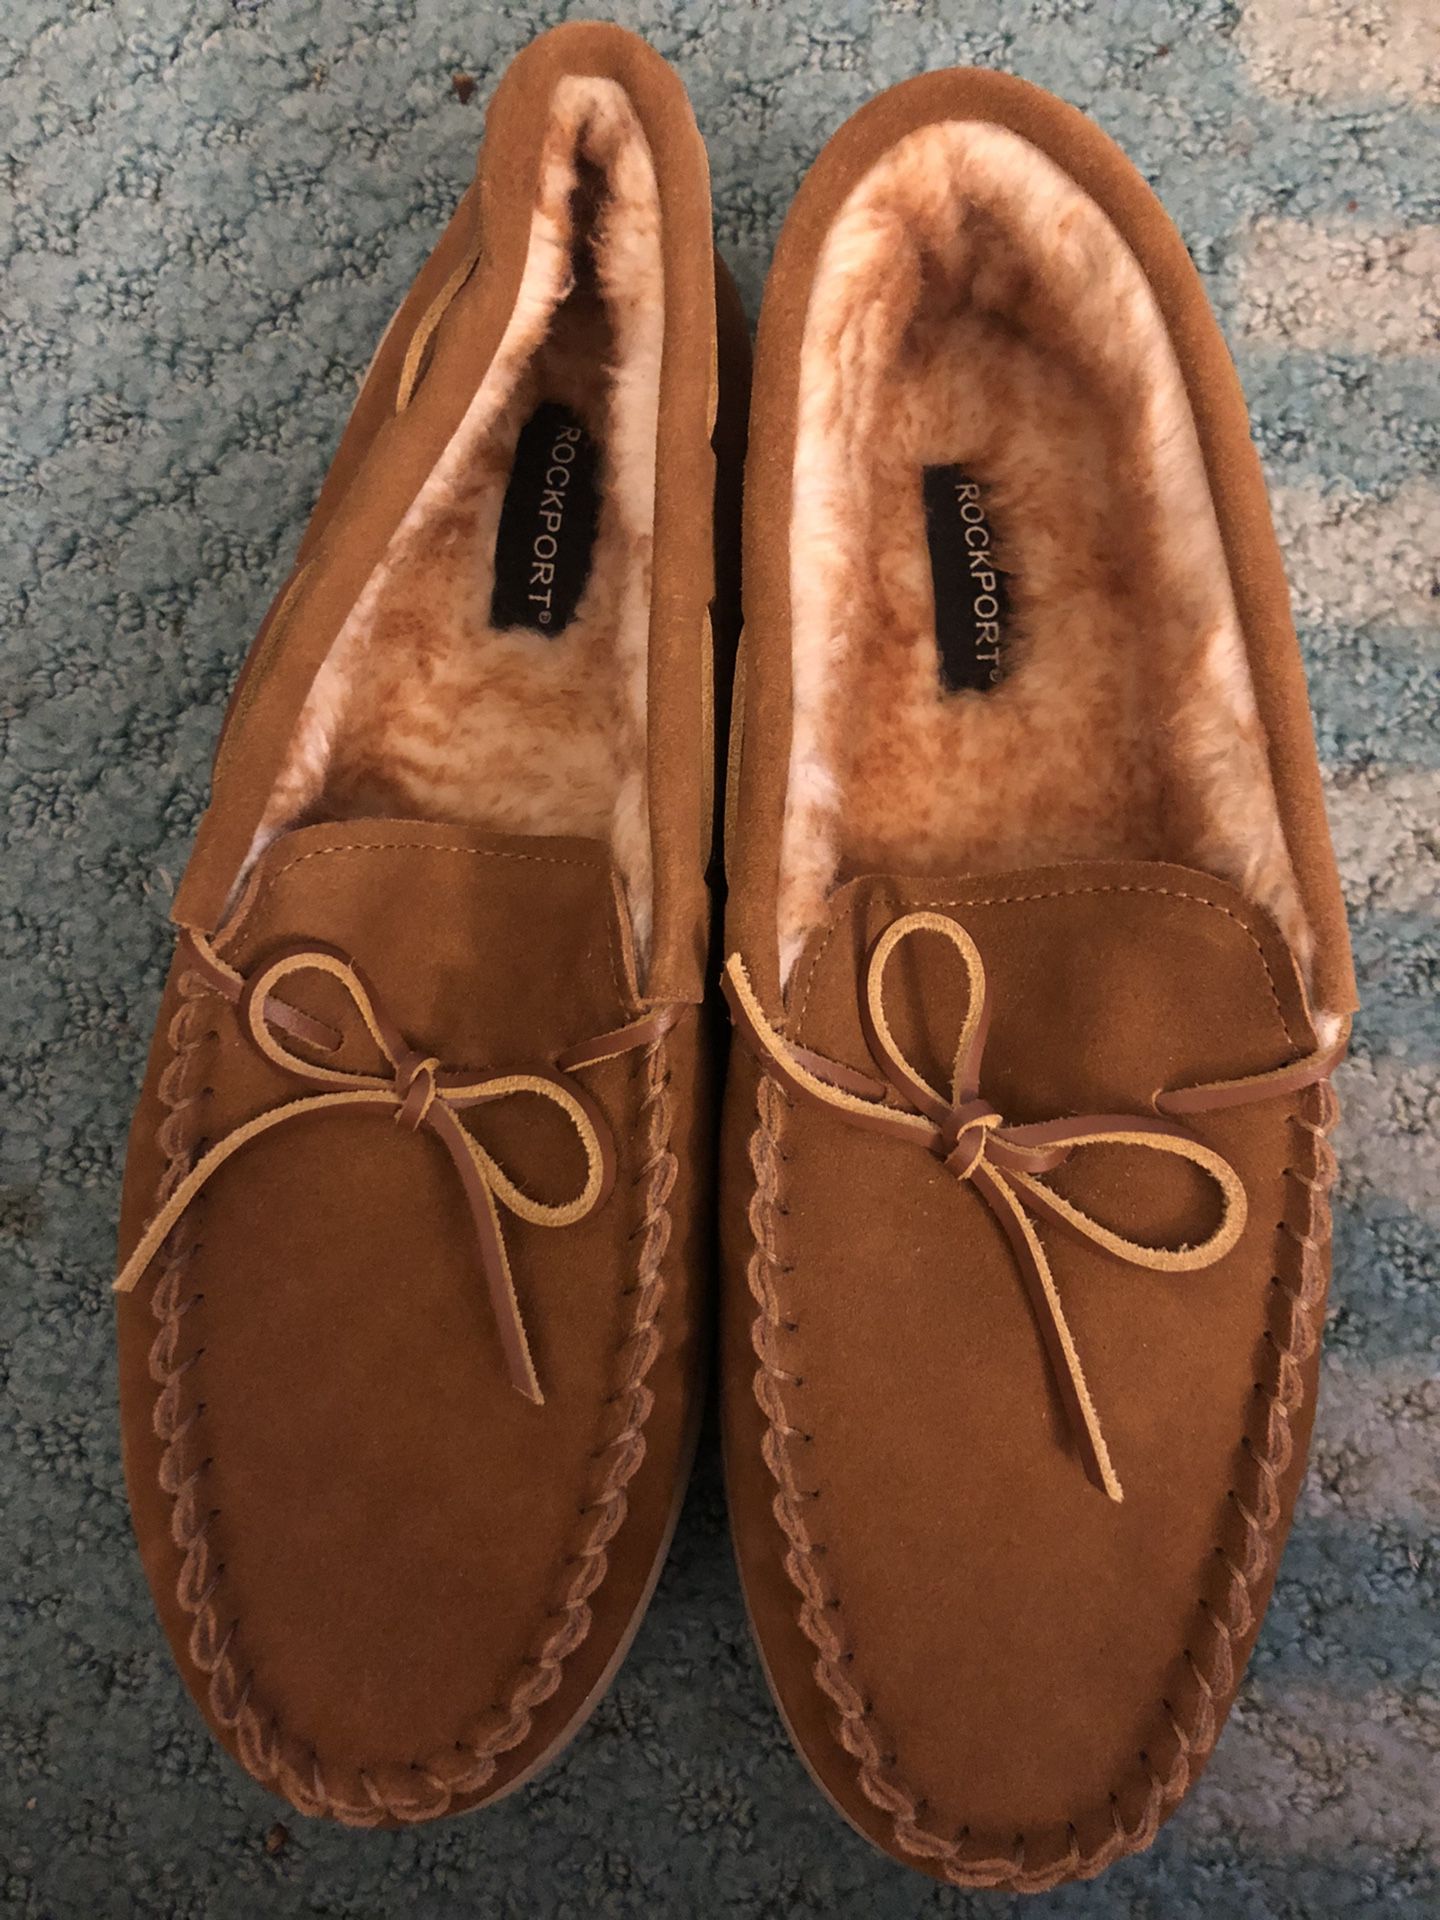 Size 13 Loafer With Faux Fur Lining Shoes Brand New With Tags On